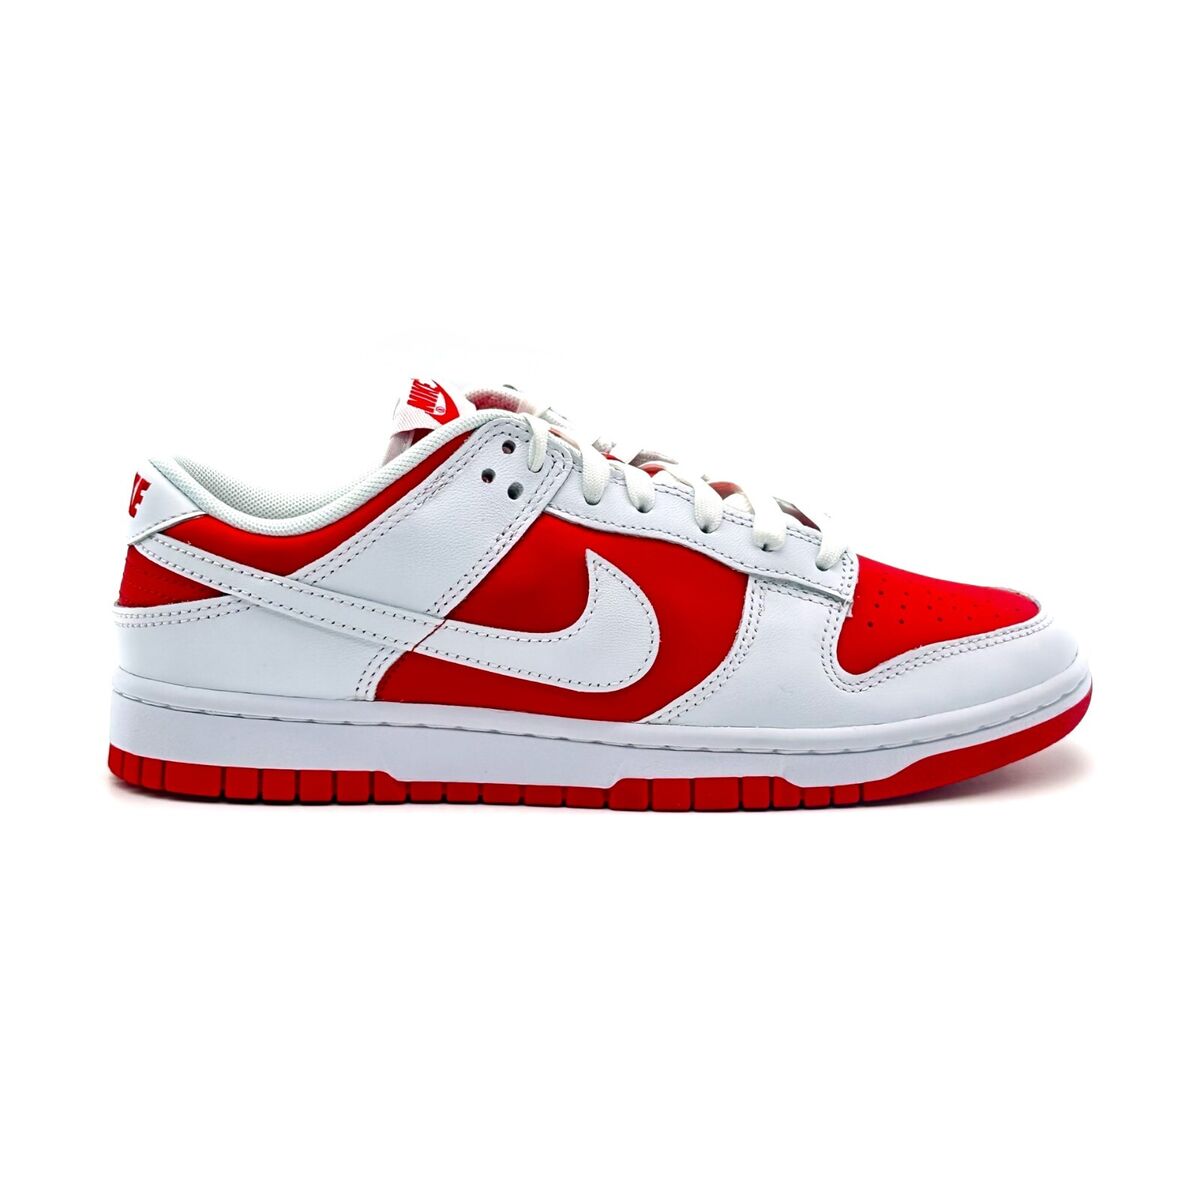 red and white dunks low